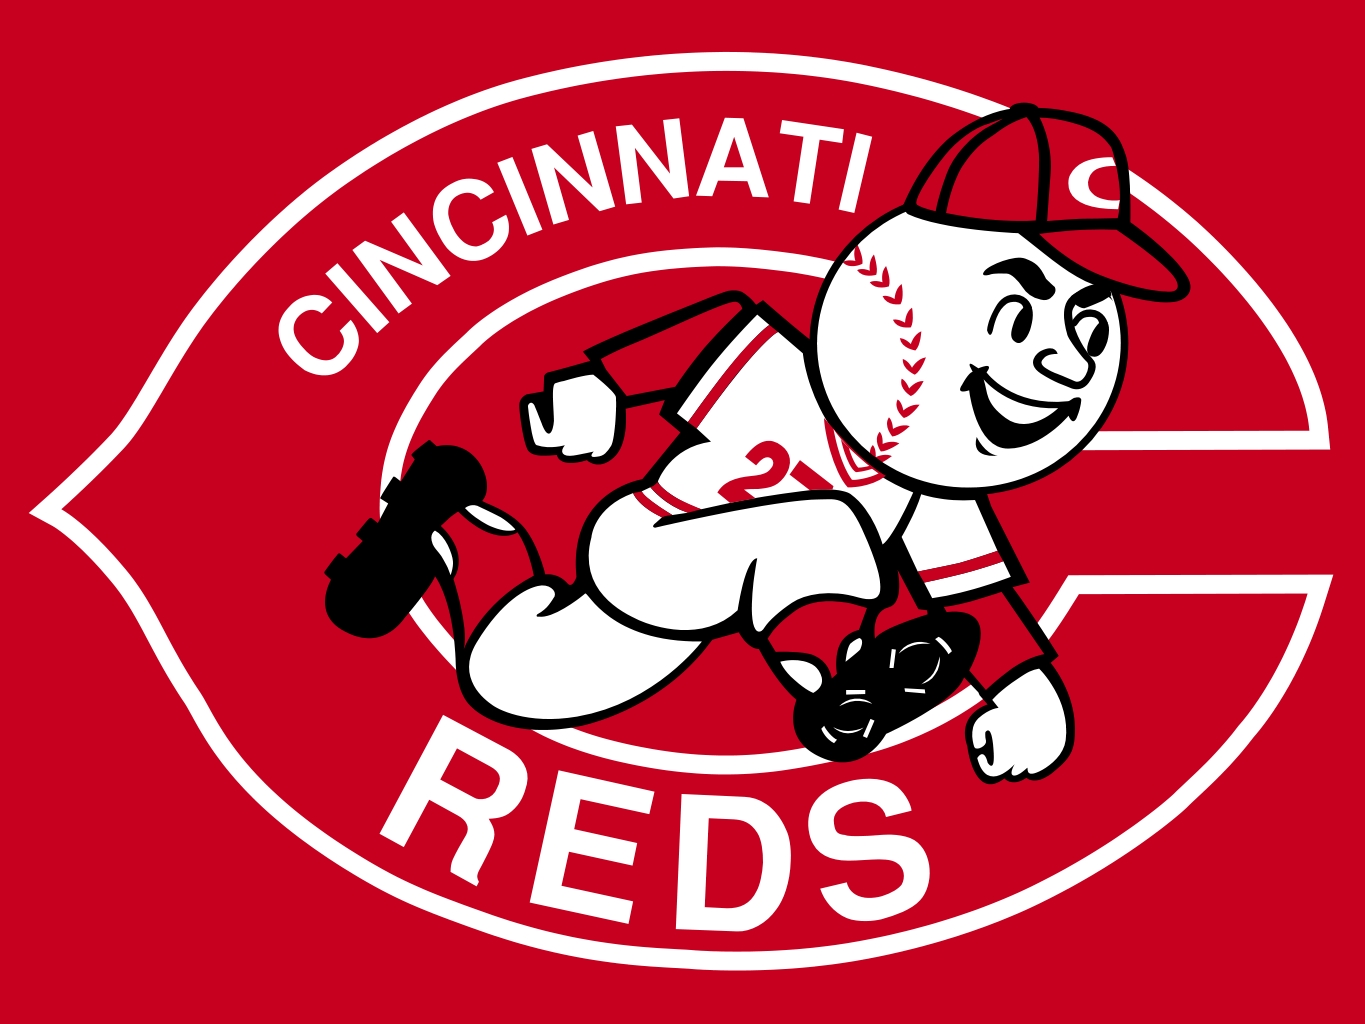 The Cincinnati Red player tested covid positive